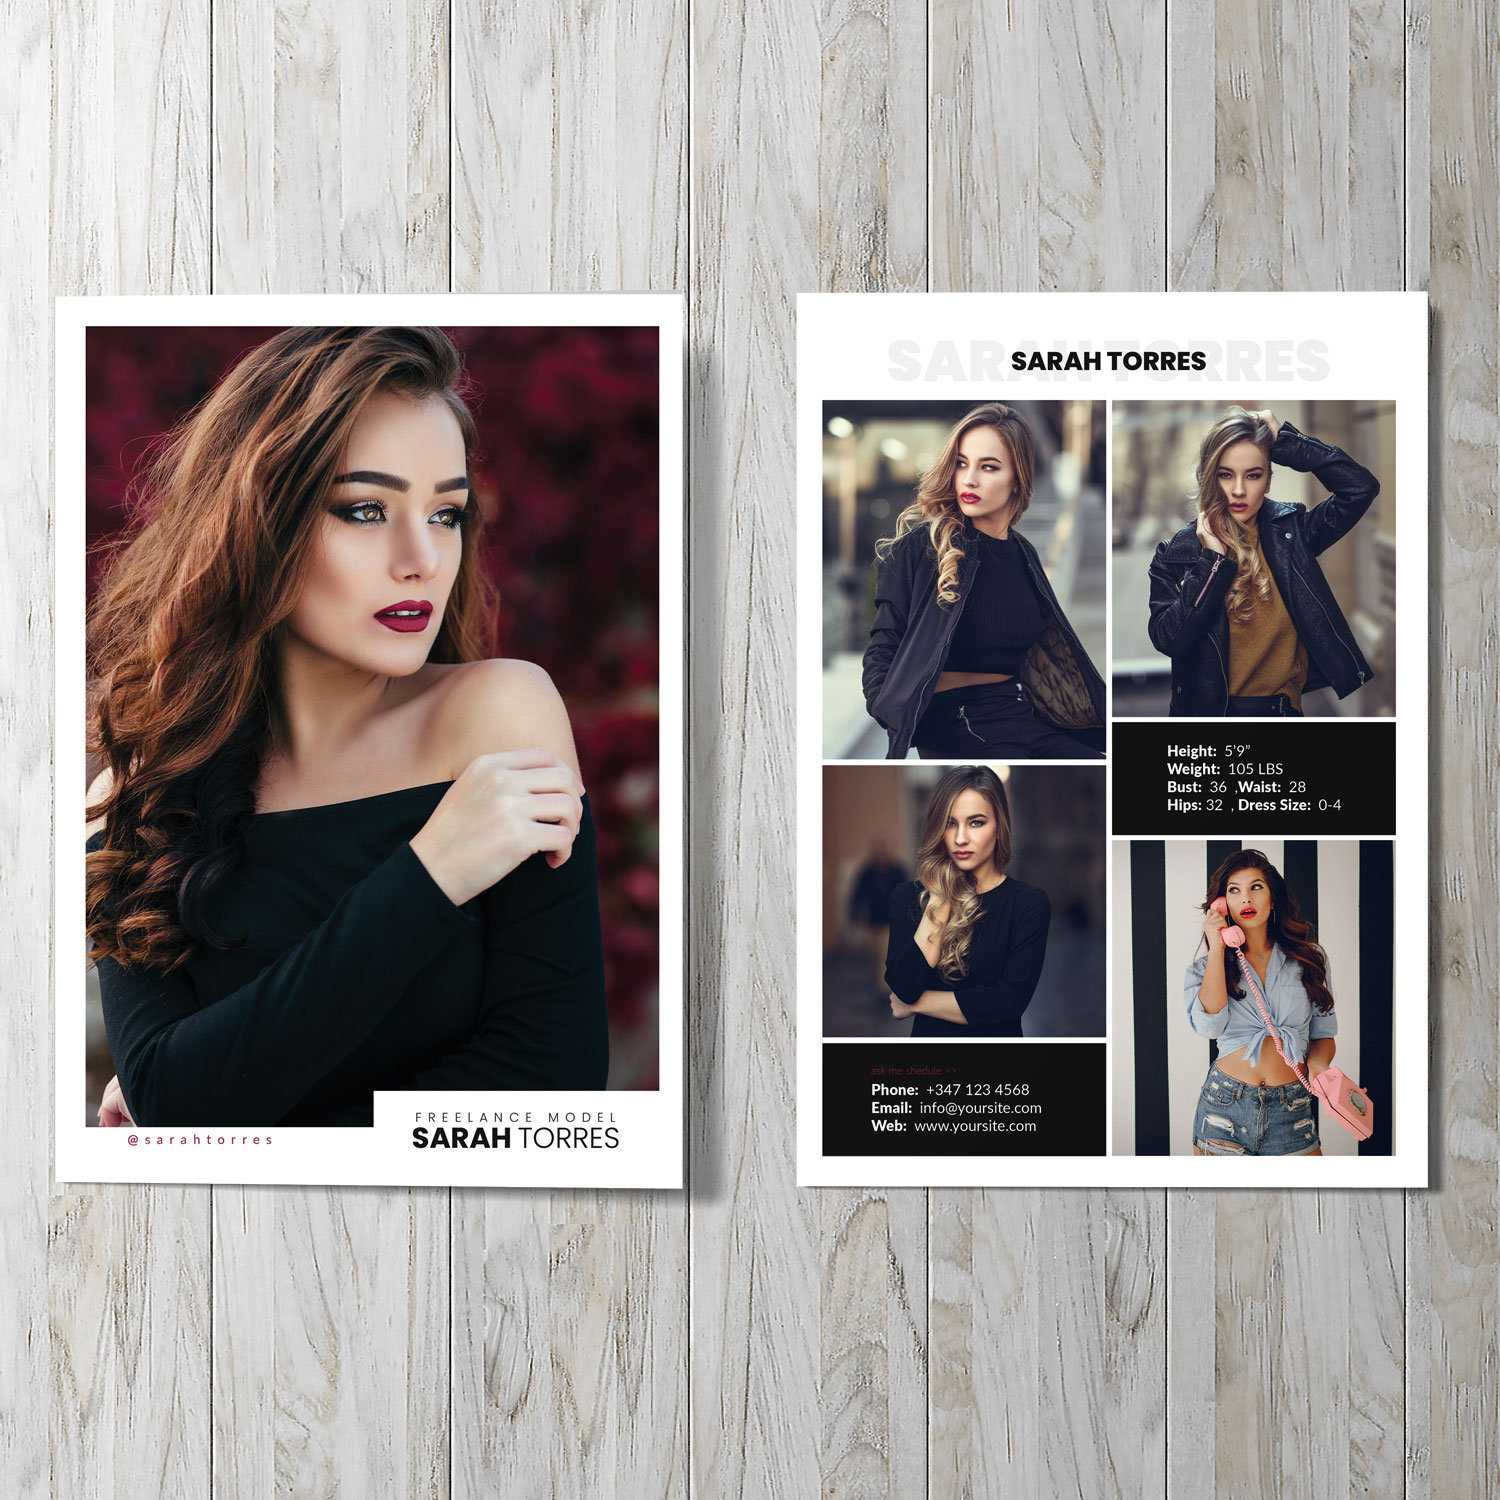 Modeling Comp Card | Fashion Model Comp Card Template | Photoshop, Elements  And Psd Template | Instant Download | Vo 01 With Comp Card Template Psd